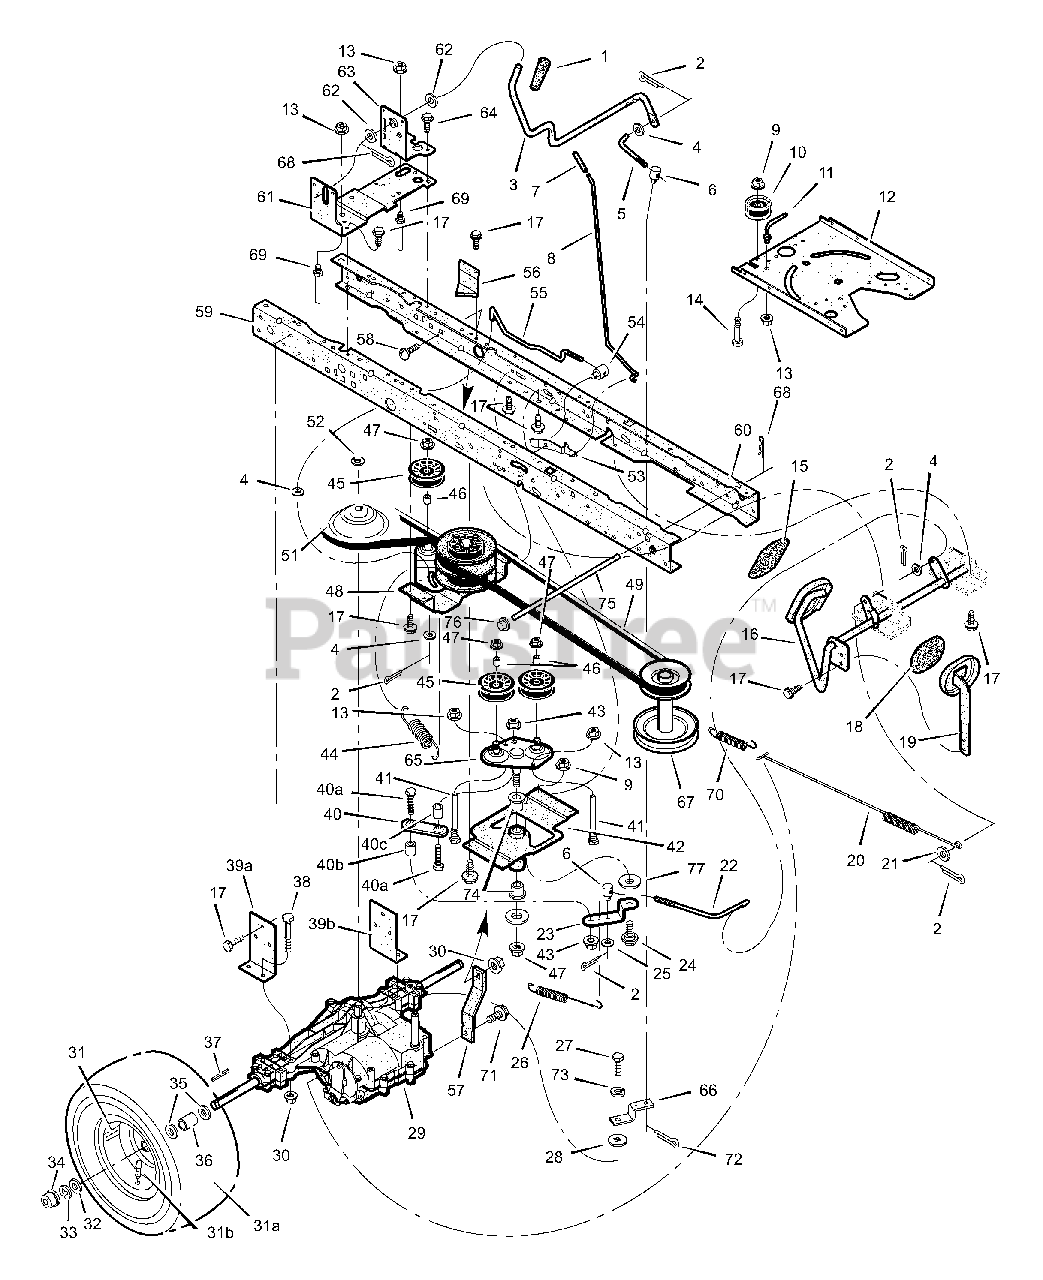 Briggs  U0026 Stratton Parts On The Transmission Diagram For